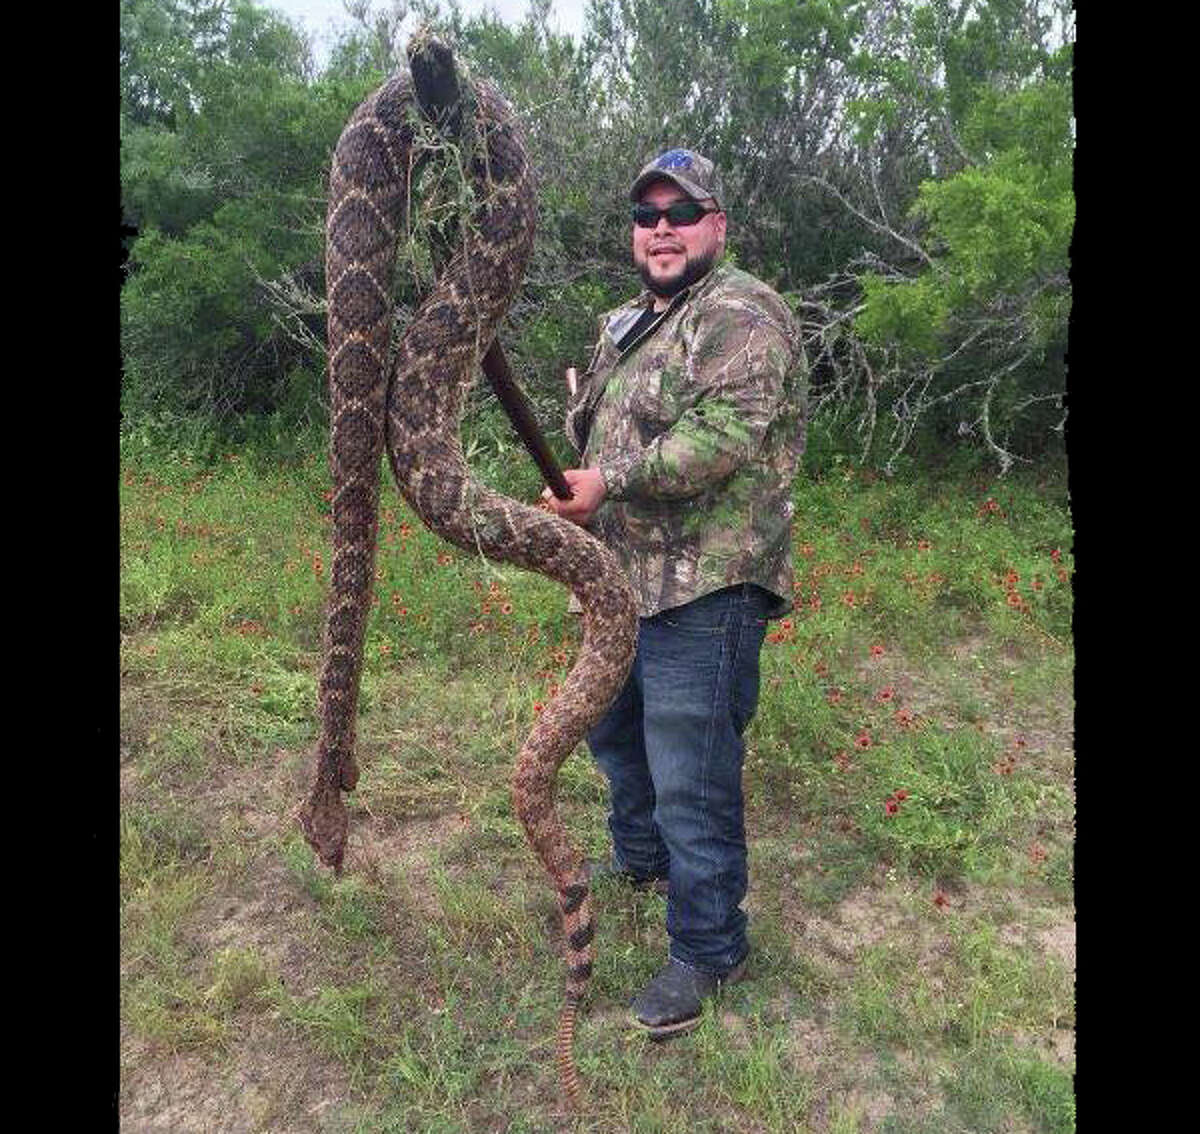 A Texas Parks and Wildlife expert says this photo, purporting to be an 11-foot rattlesnake, is a fake.